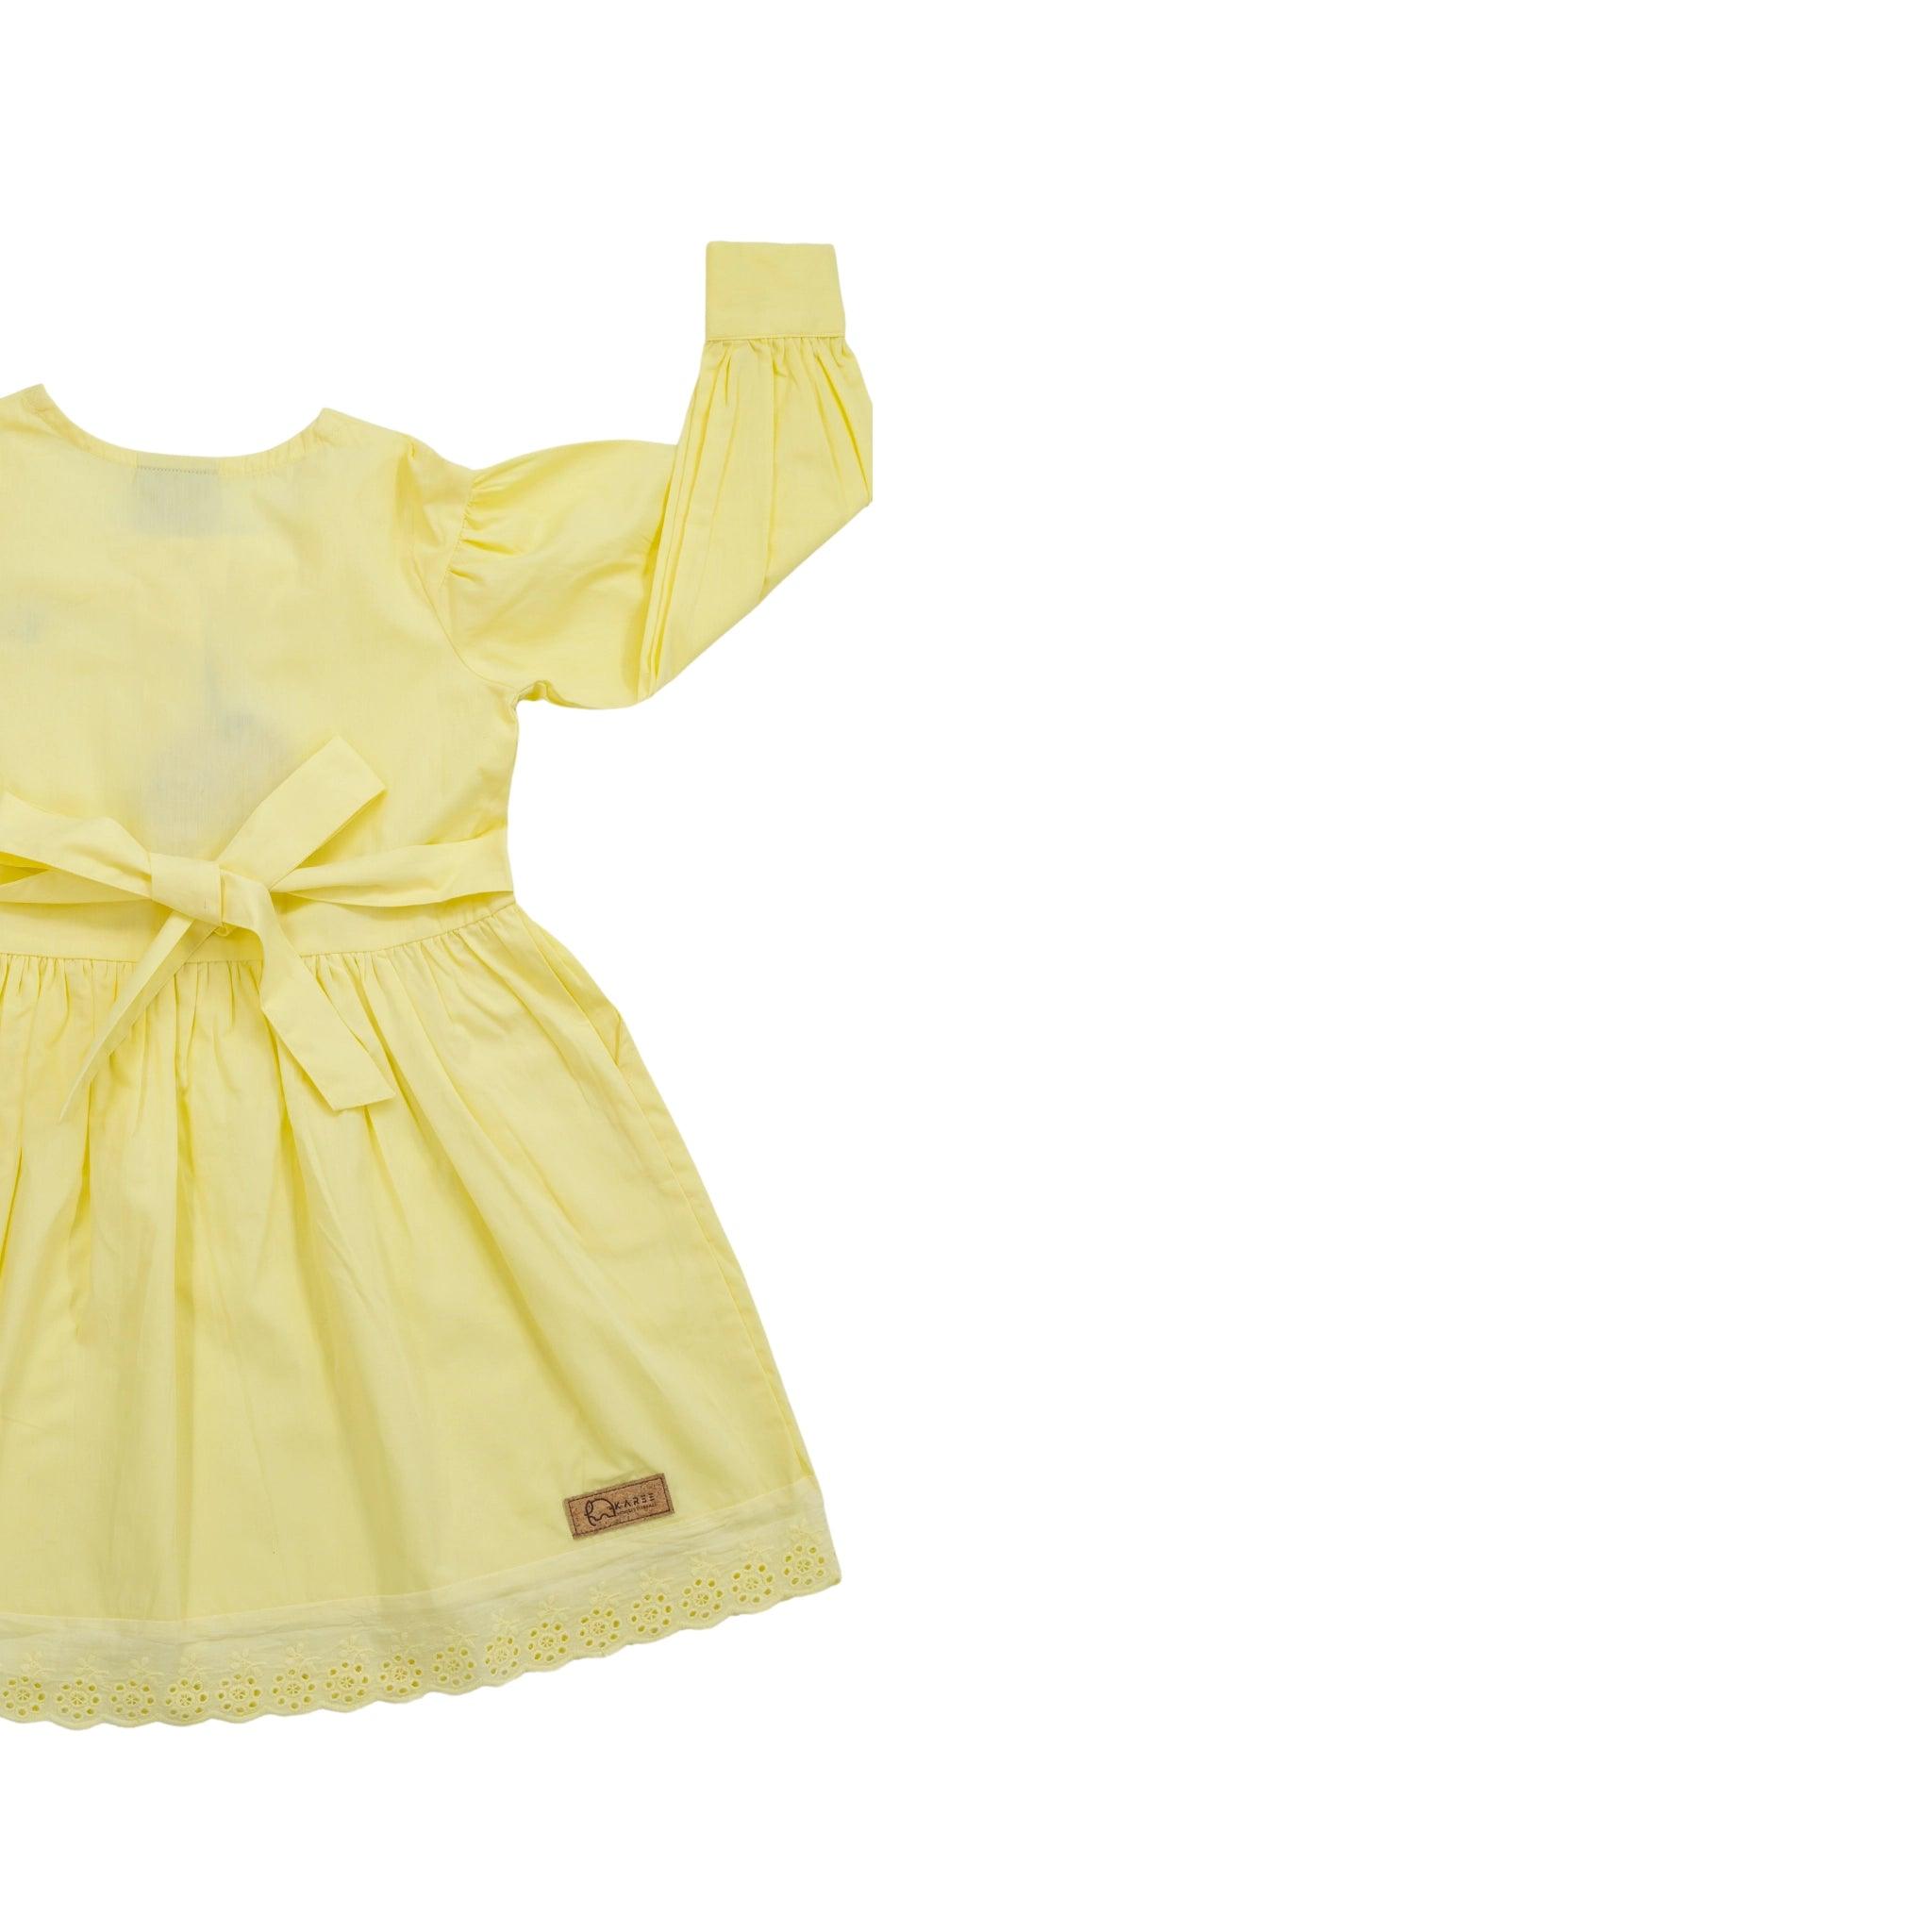 Yellow Karee children's dress with long puff sleeves, a bow at the back, and lace trim, isolated on a white background.